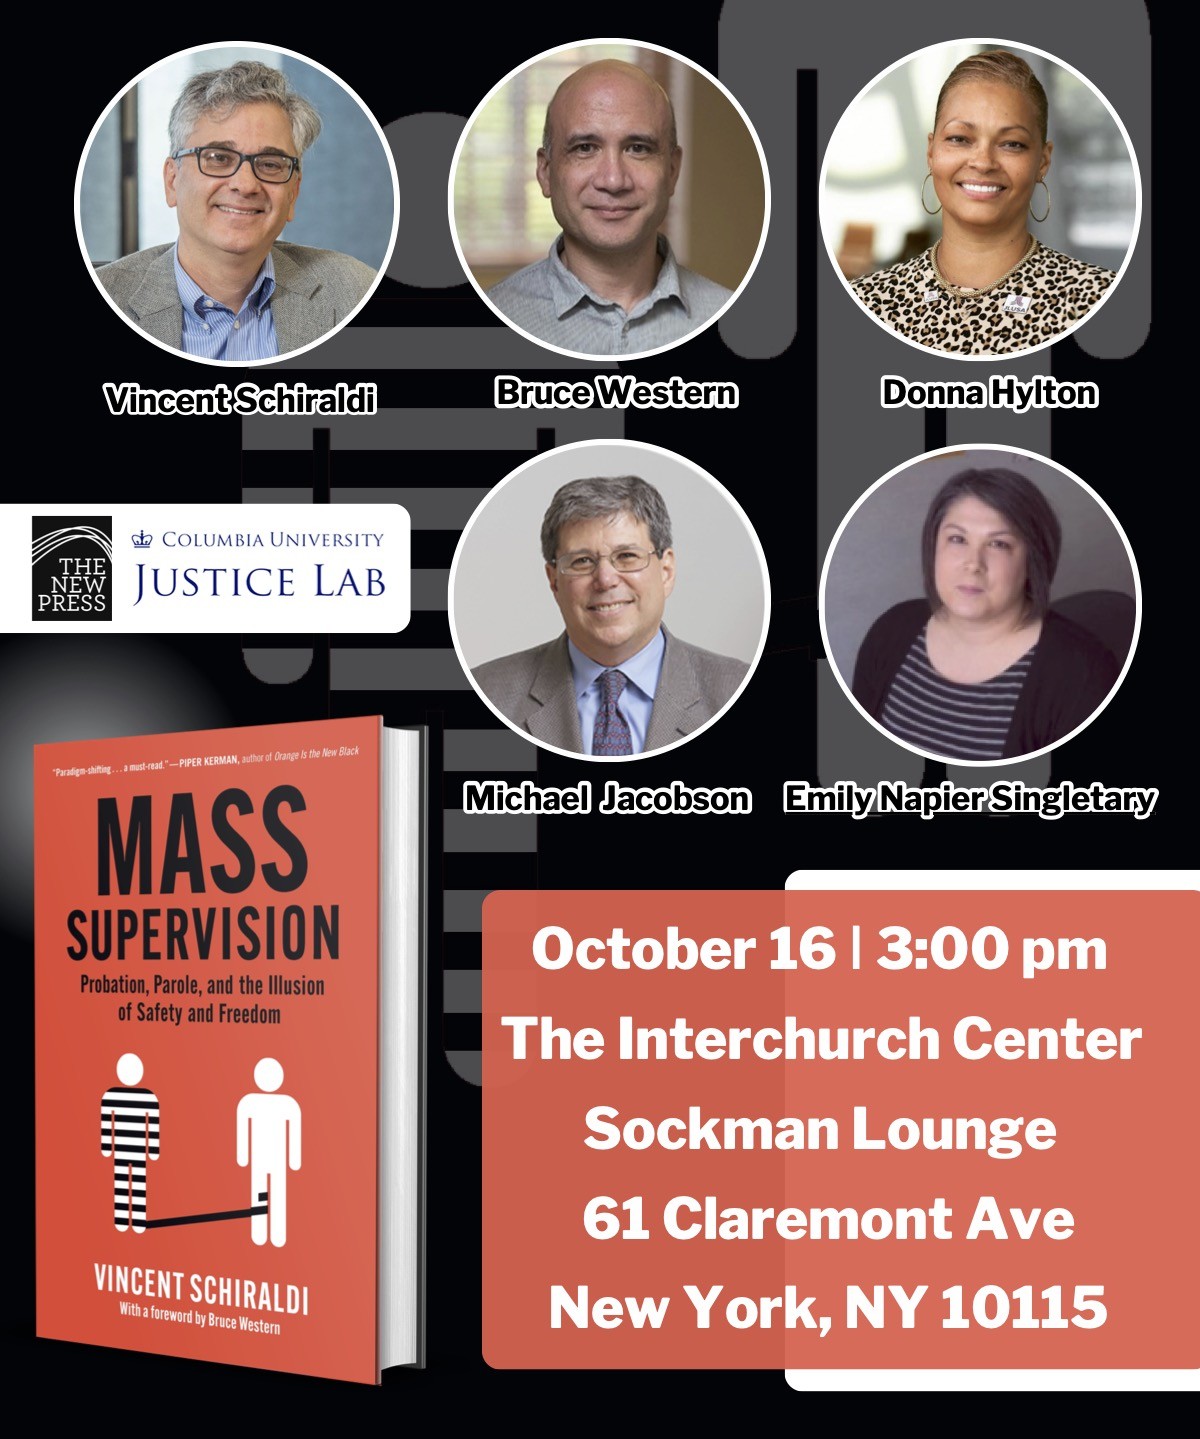 Event flyer for Mass Supervision book discussion